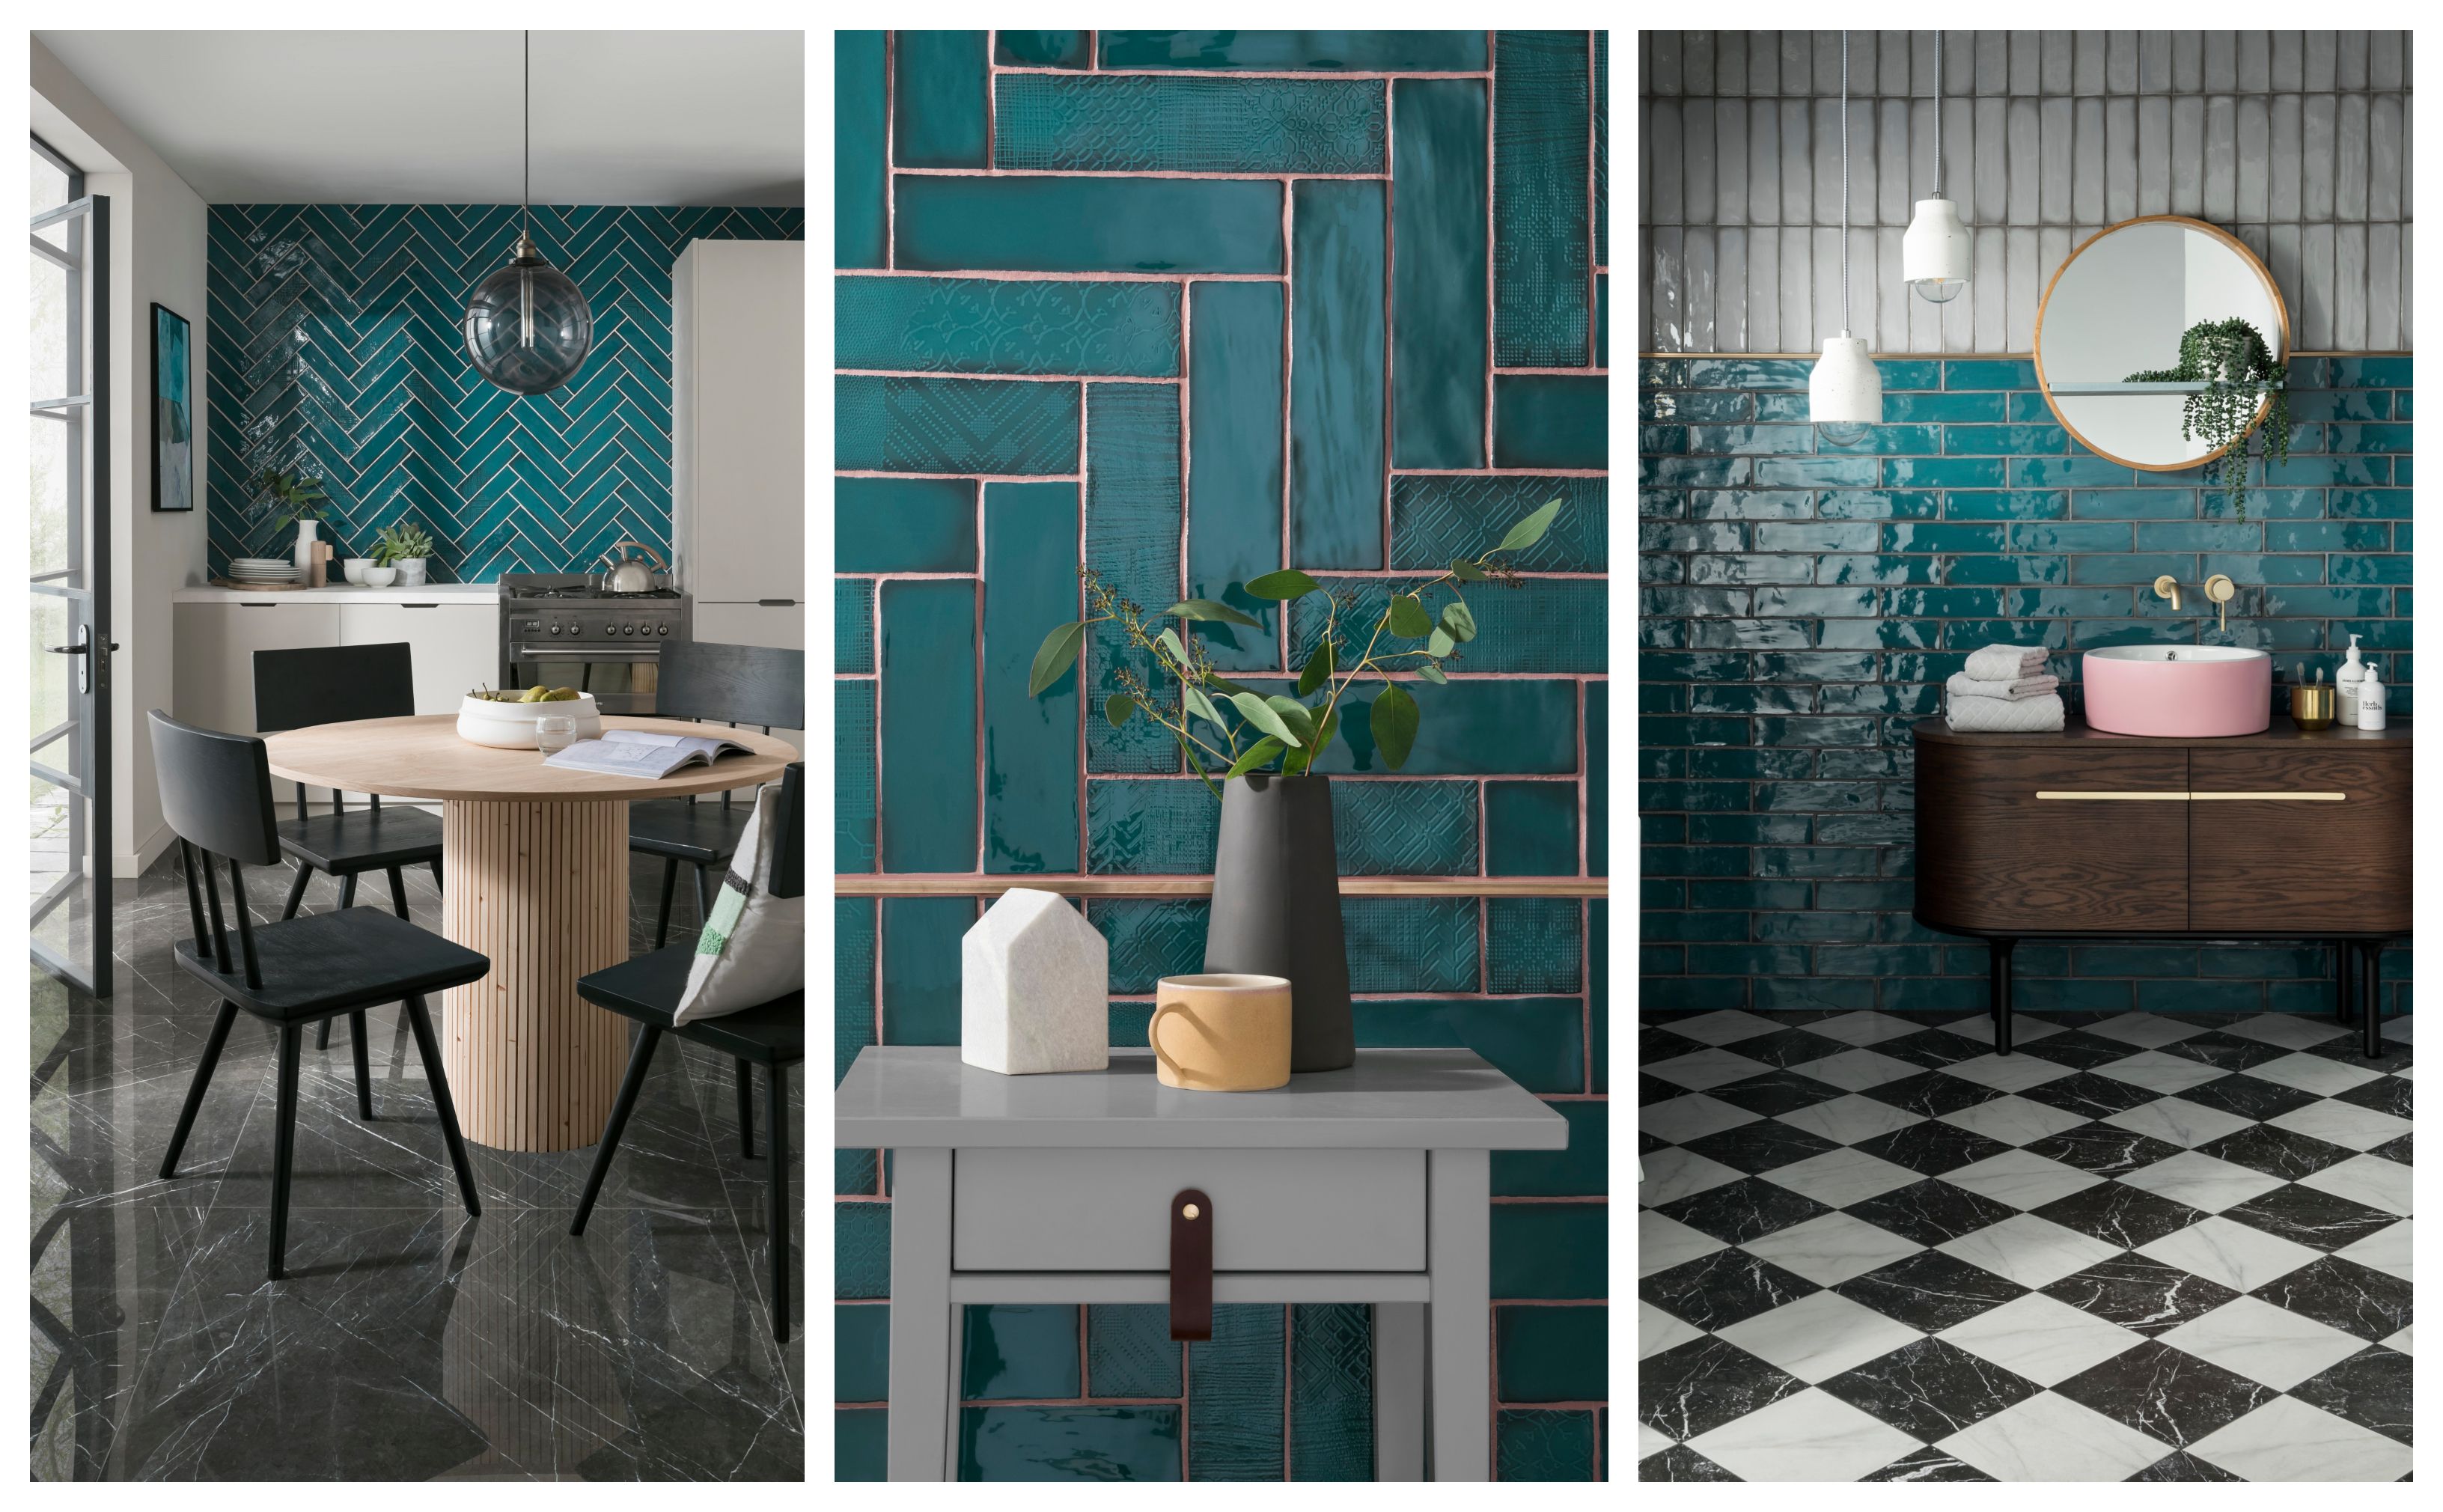 Stå på ski hypotese At understrege Topps Tiles: Lampas Peacock unveiled as Tile of the Year 2019 - Wall Tiles